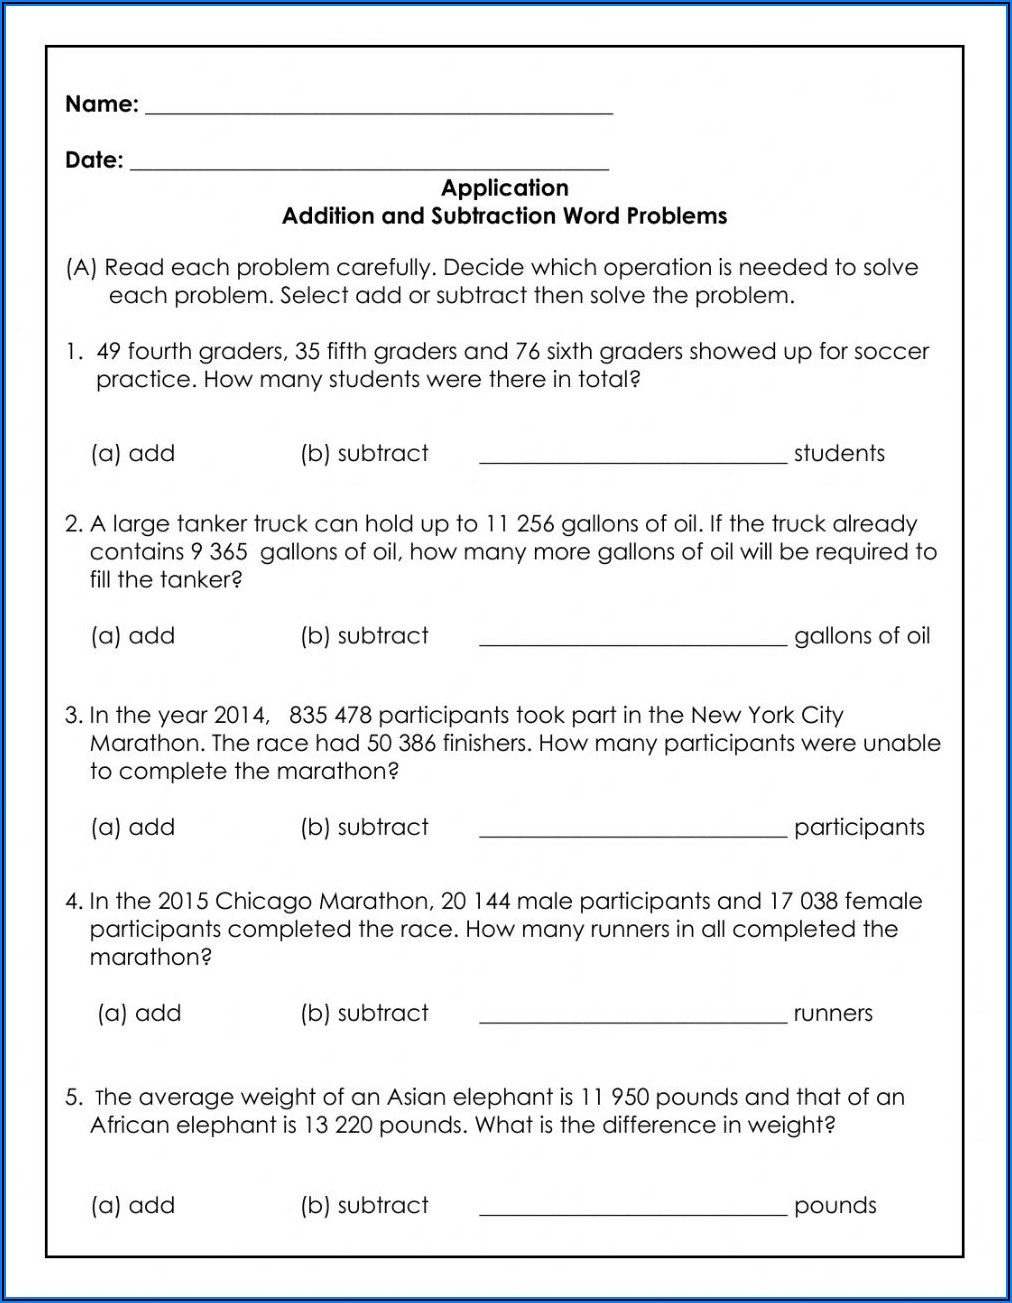 Worksheet On Word Problems On Addition And Subtraction For Grade 4